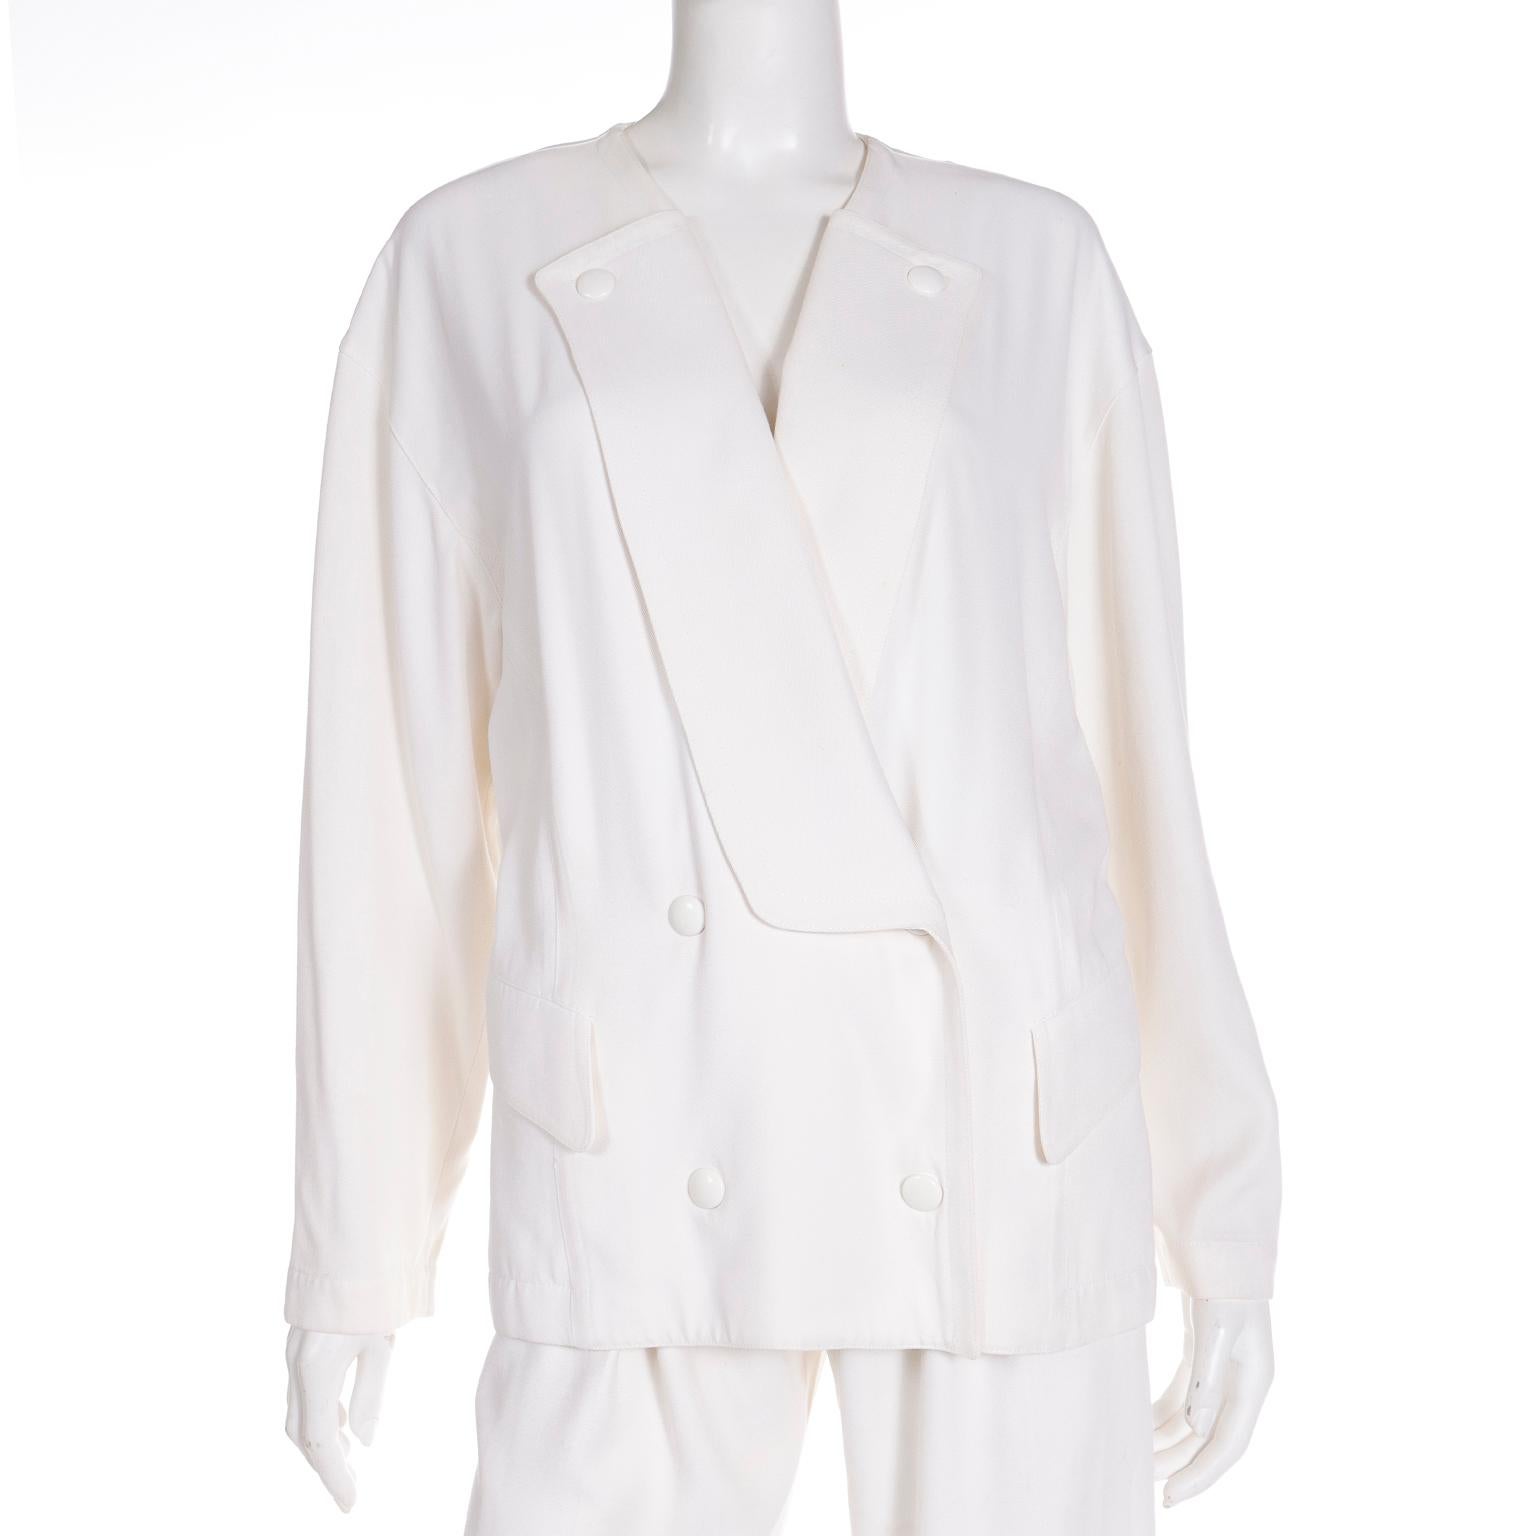 Thierry Mugler Vintage White 2 Pc Suit Jacket & Trousers Outfit  For Sale 5